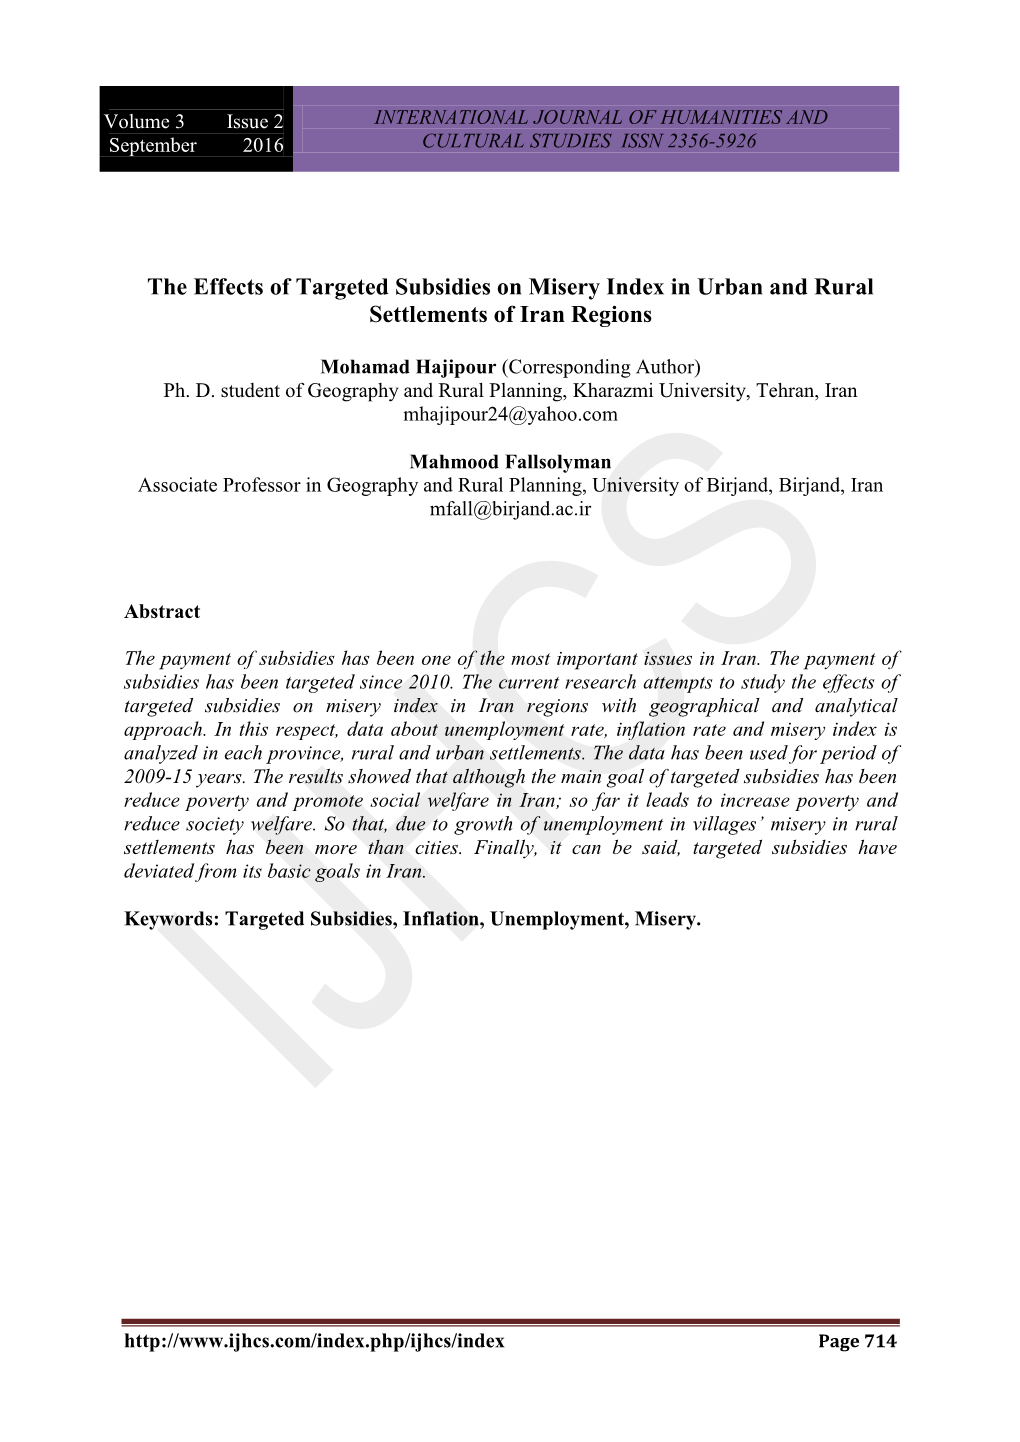 The Effects of Targeted Subsidies on Misery Index in Urban and Rural Settlements of Iran Regions